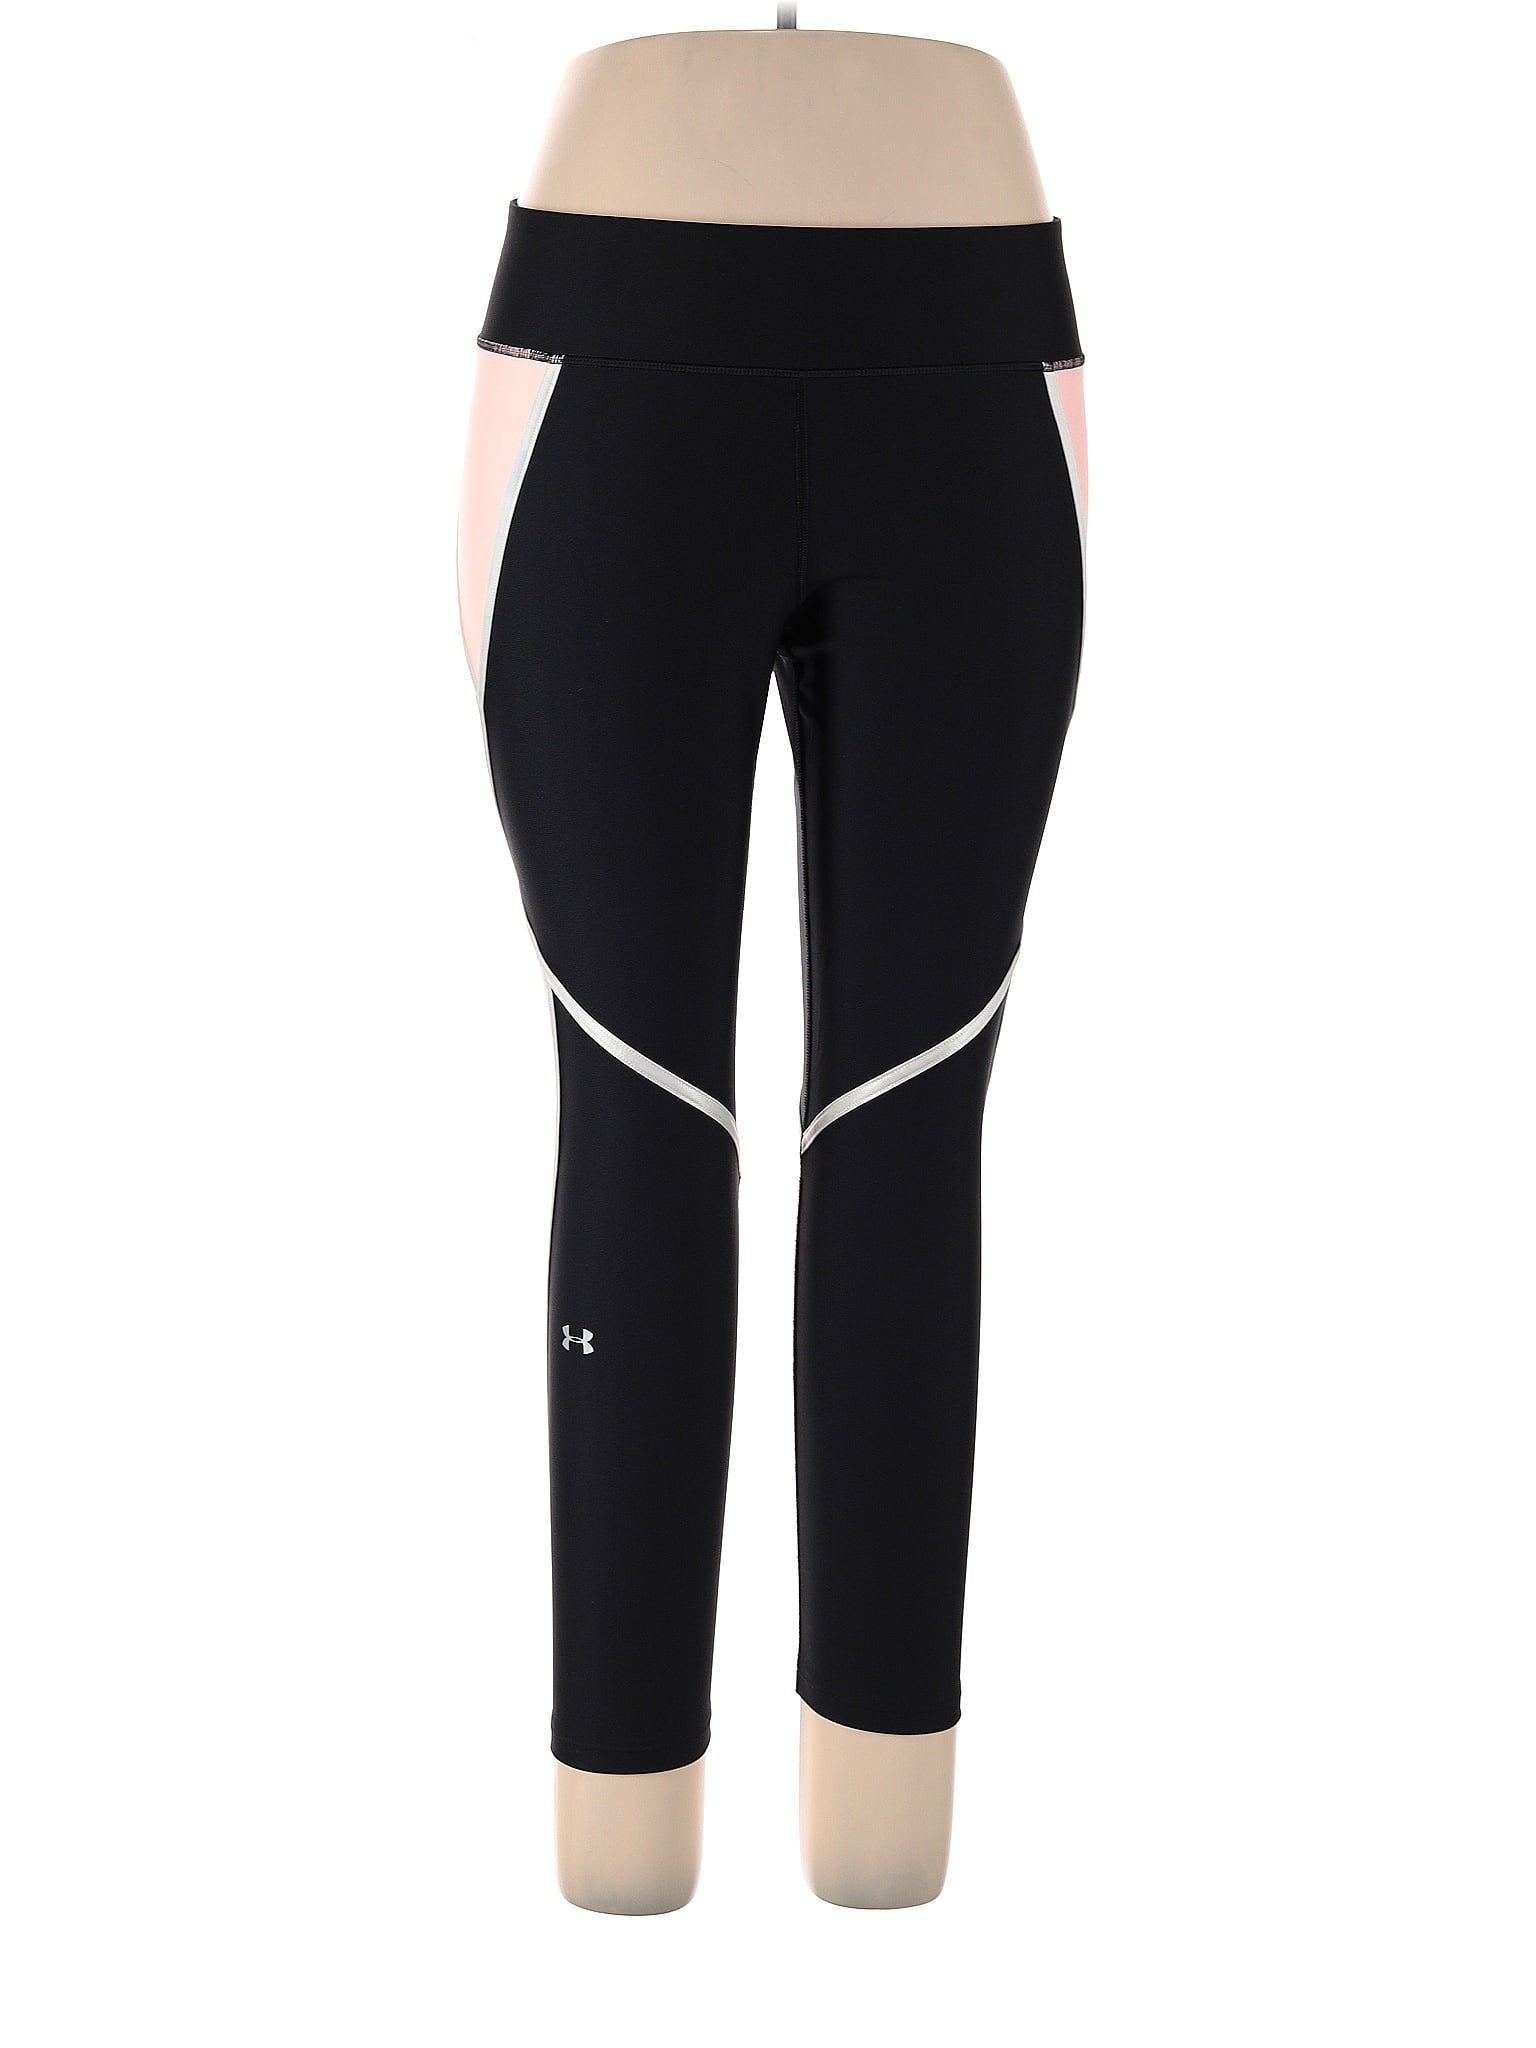 Rbx Active RBX Leggings Black Size M - $16 (54% Off Retail) - From